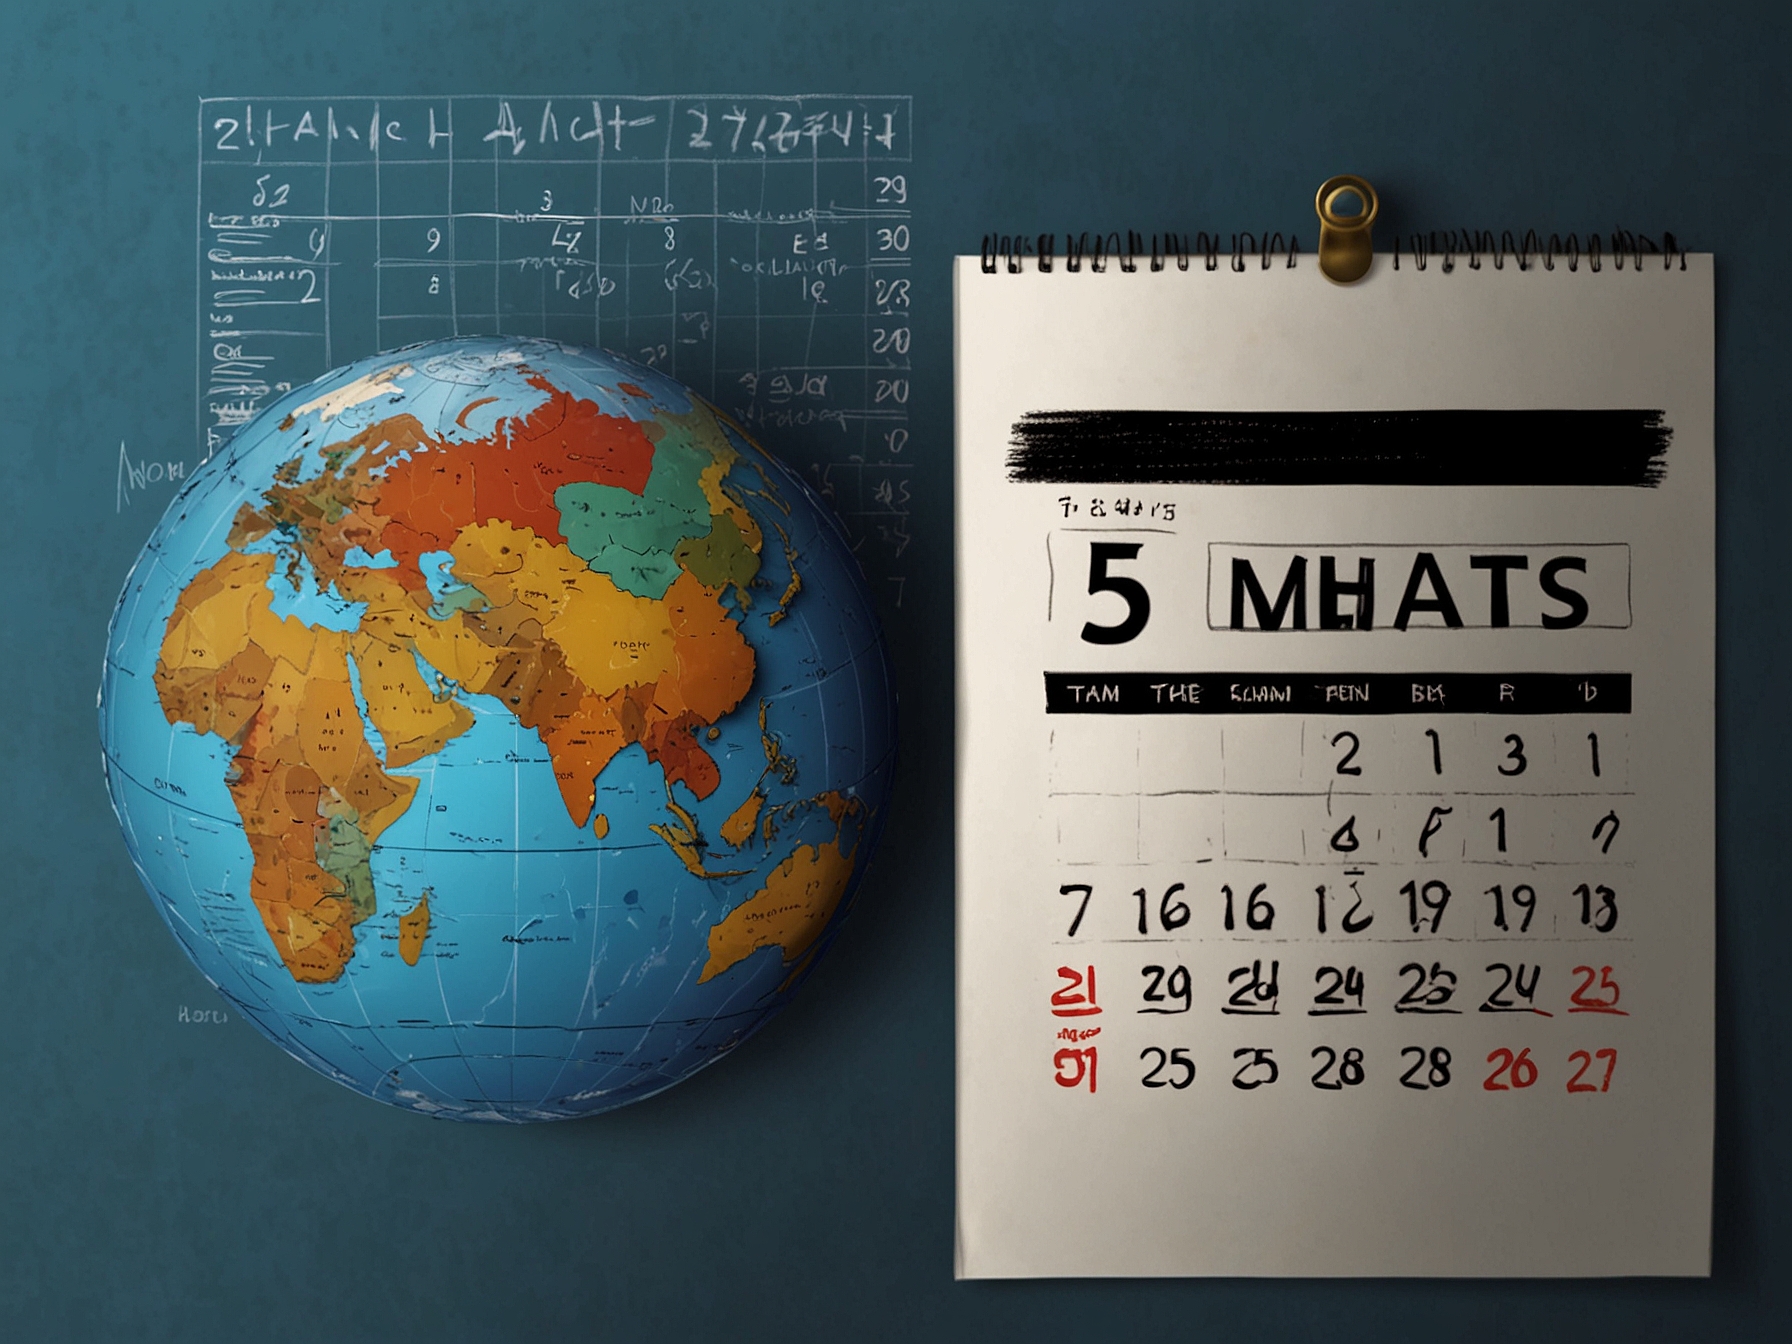 An illustration of a calendar marked with a '5 years' sign to signify the delay, with a backdrop of a globe depicting various countries under scrutiny for human rights conditions.